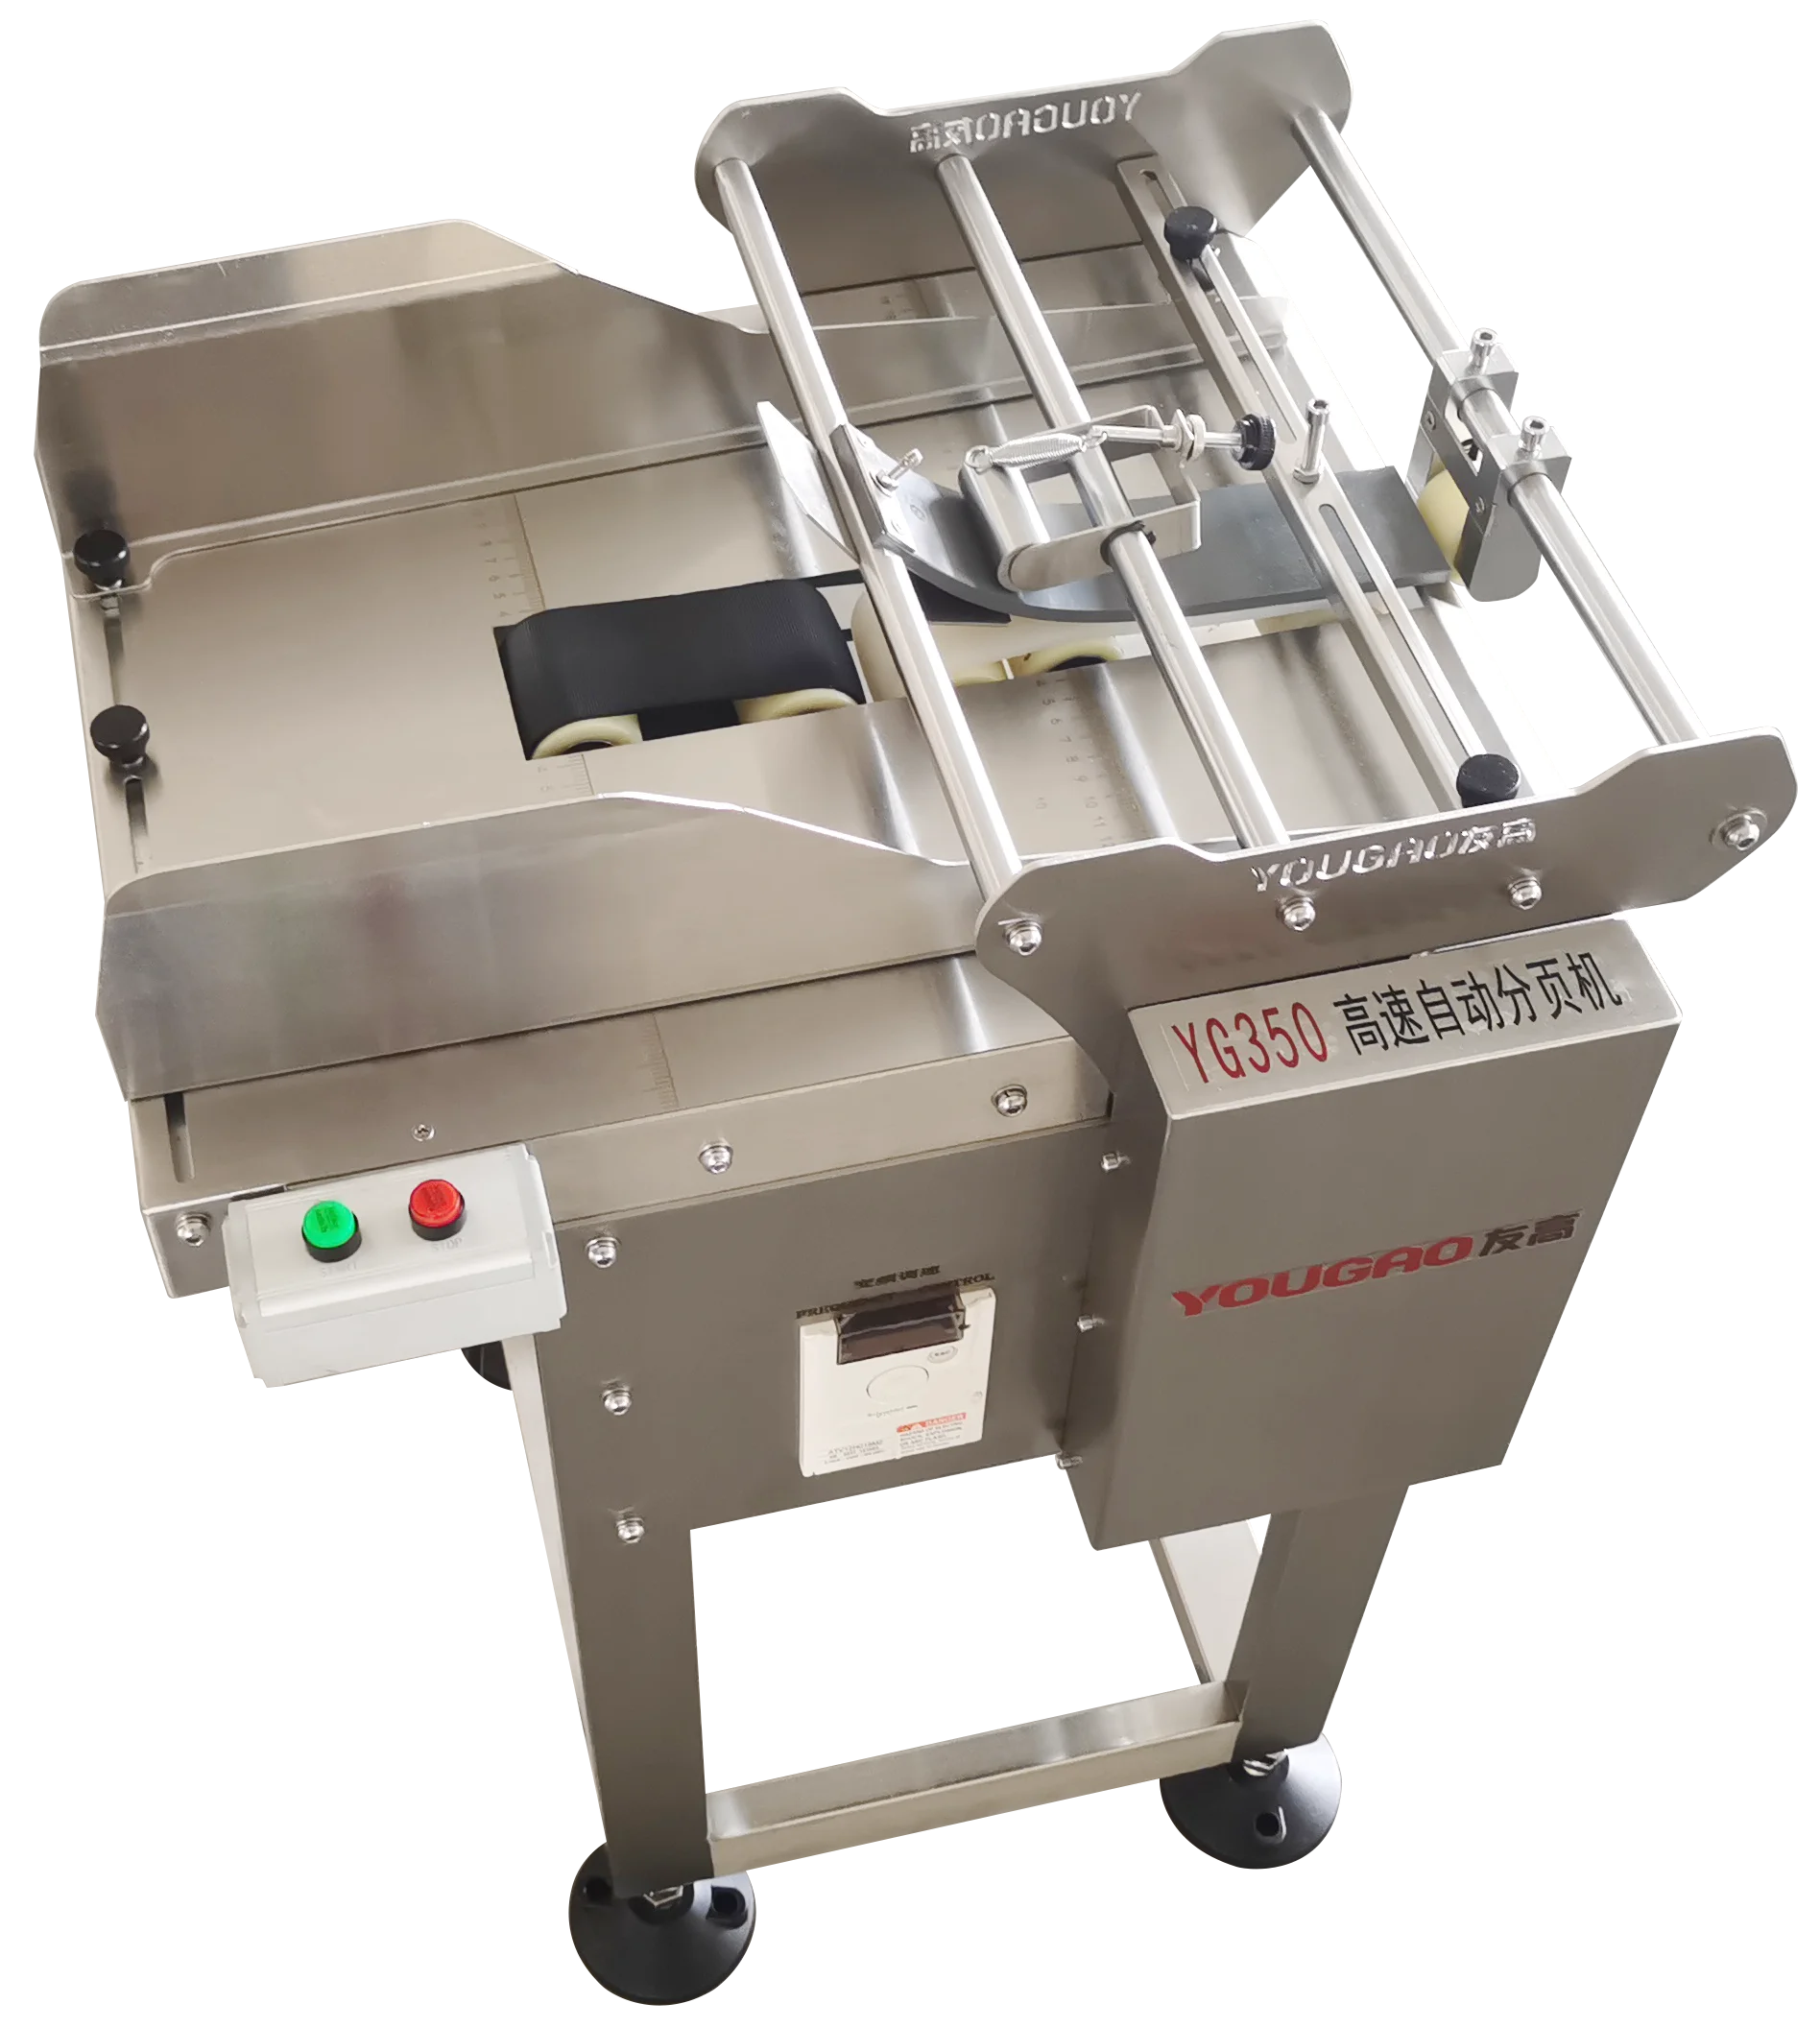 
YG 350-F automatic friction pouch feeder for plastic bags 